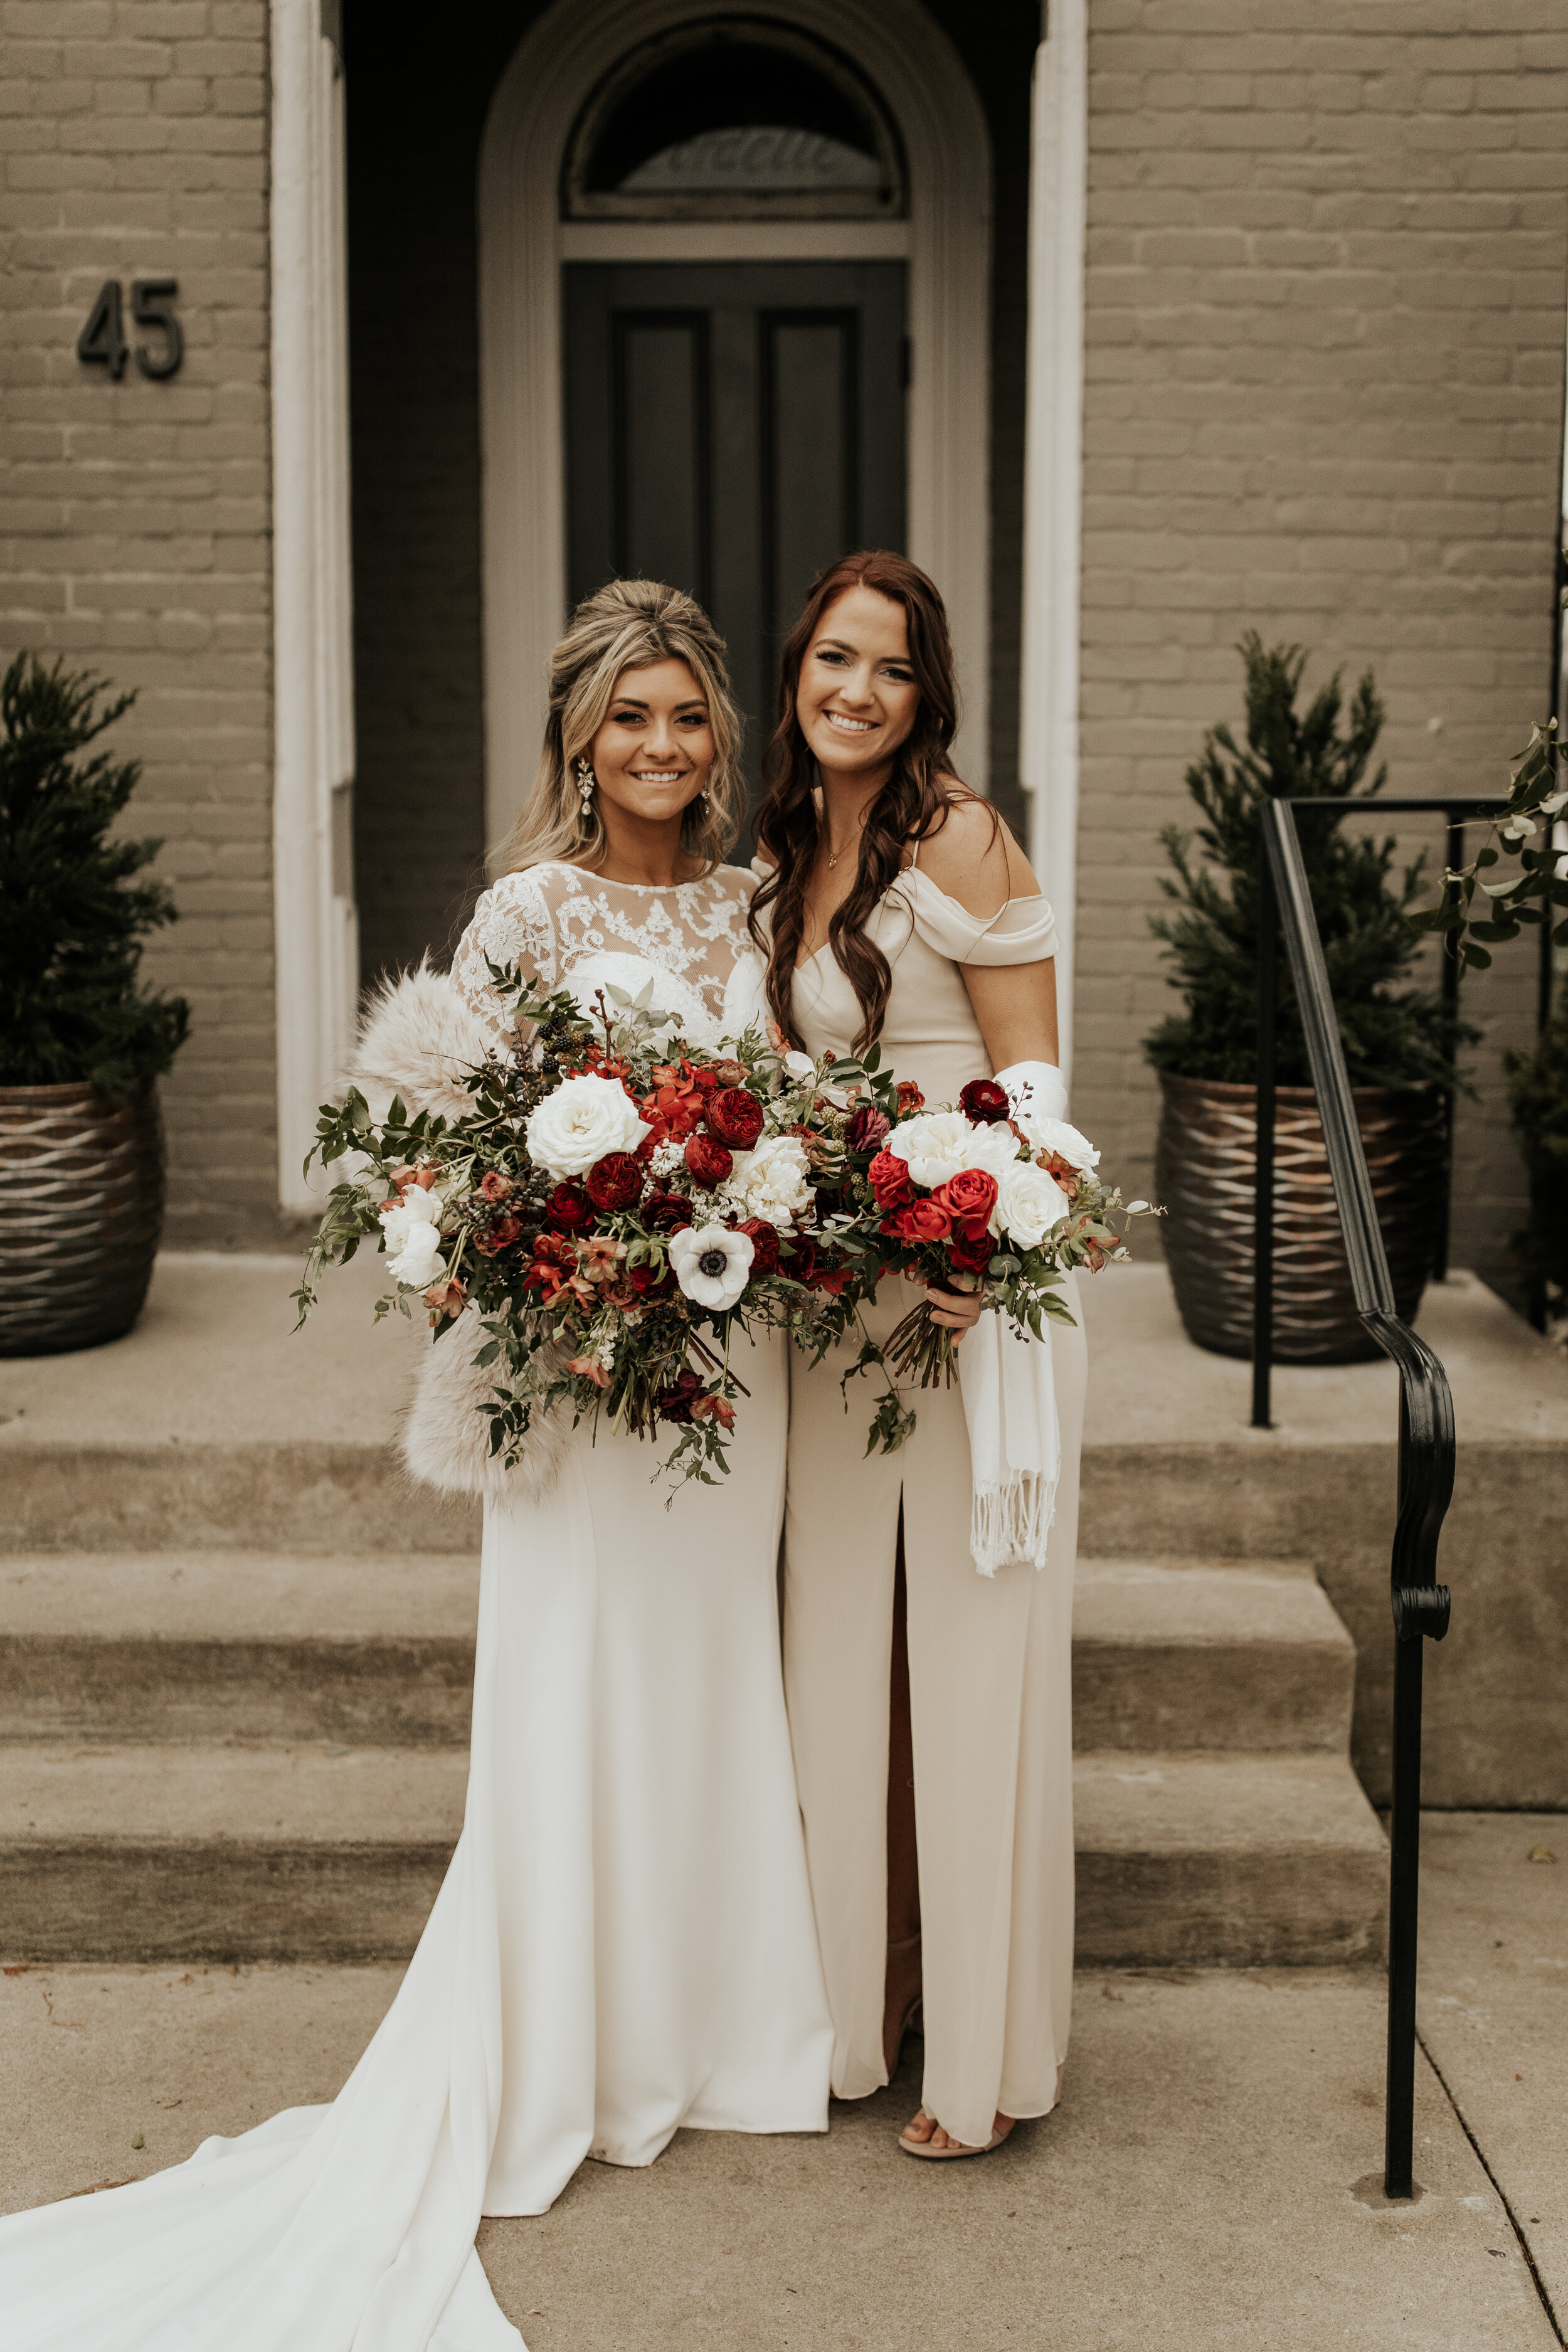 Neutral bridesmaid dresses with burgundy, white, and greenery bouquets of garden roses, peonies, and ranunculus for a wintry wedding at the Cordelle in Nashville.